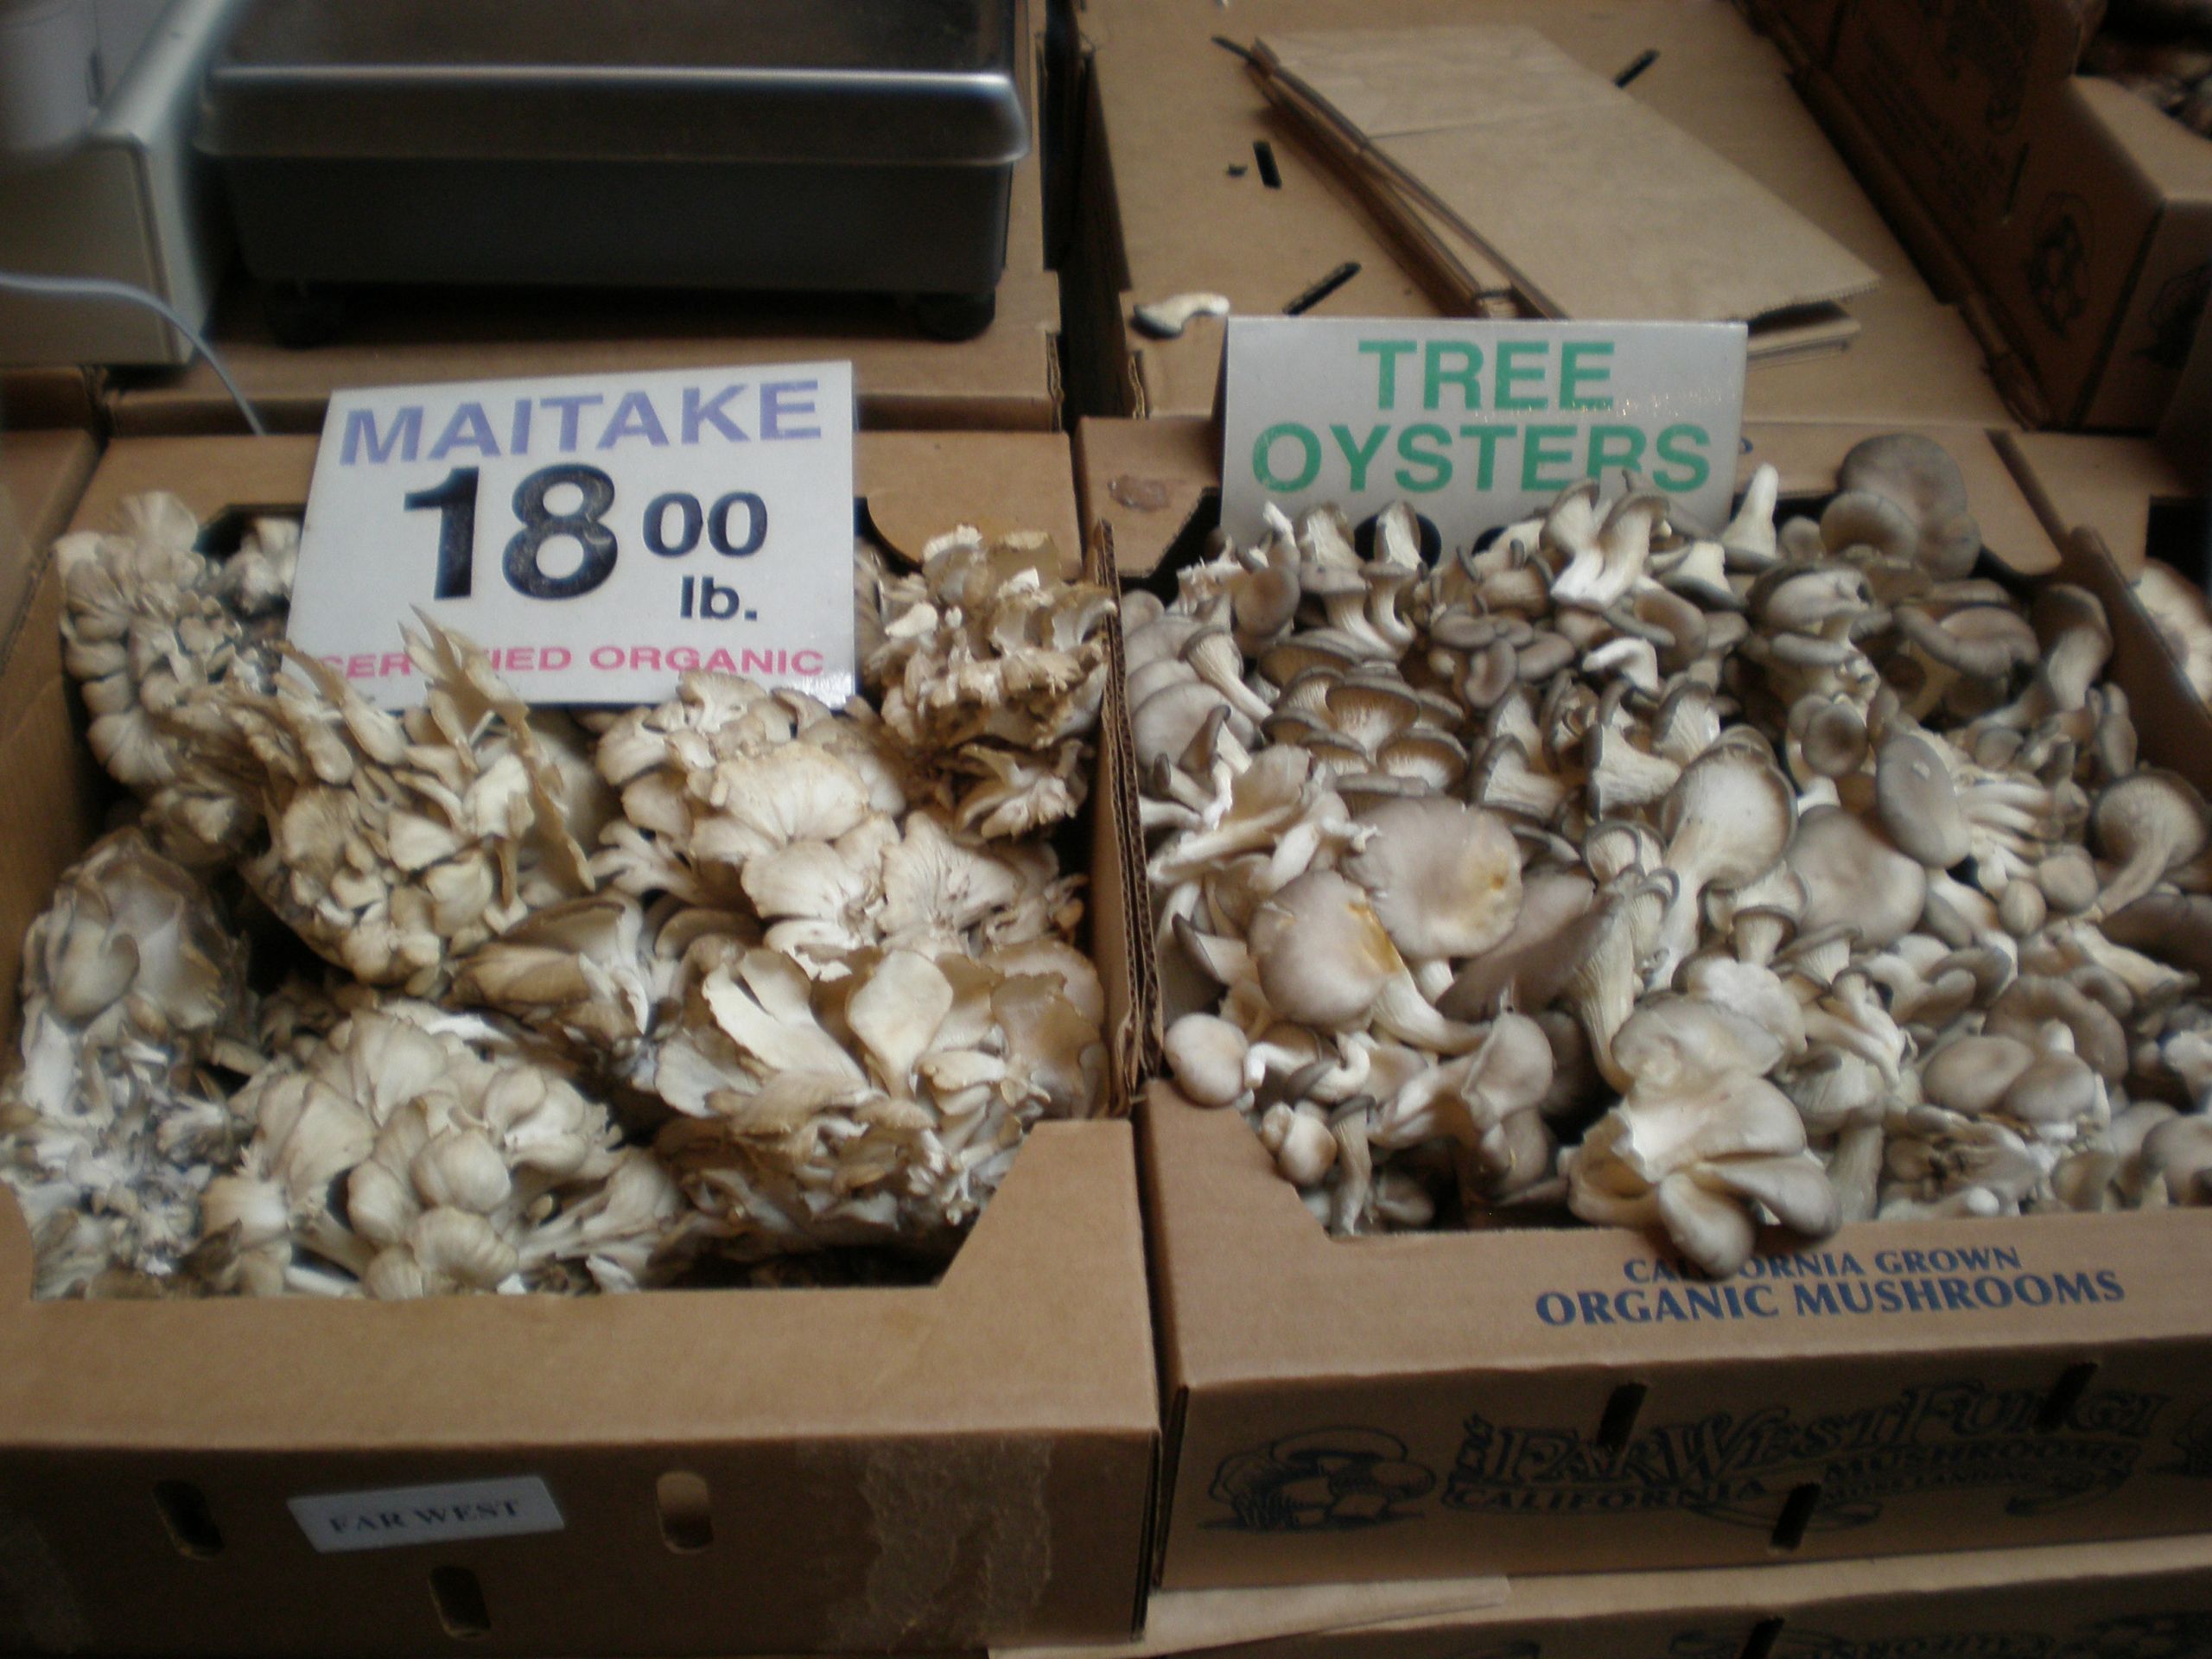 Oyster Mushrooms For Sale
 File Boxes of maitake & tree oyster mushrooms JPG